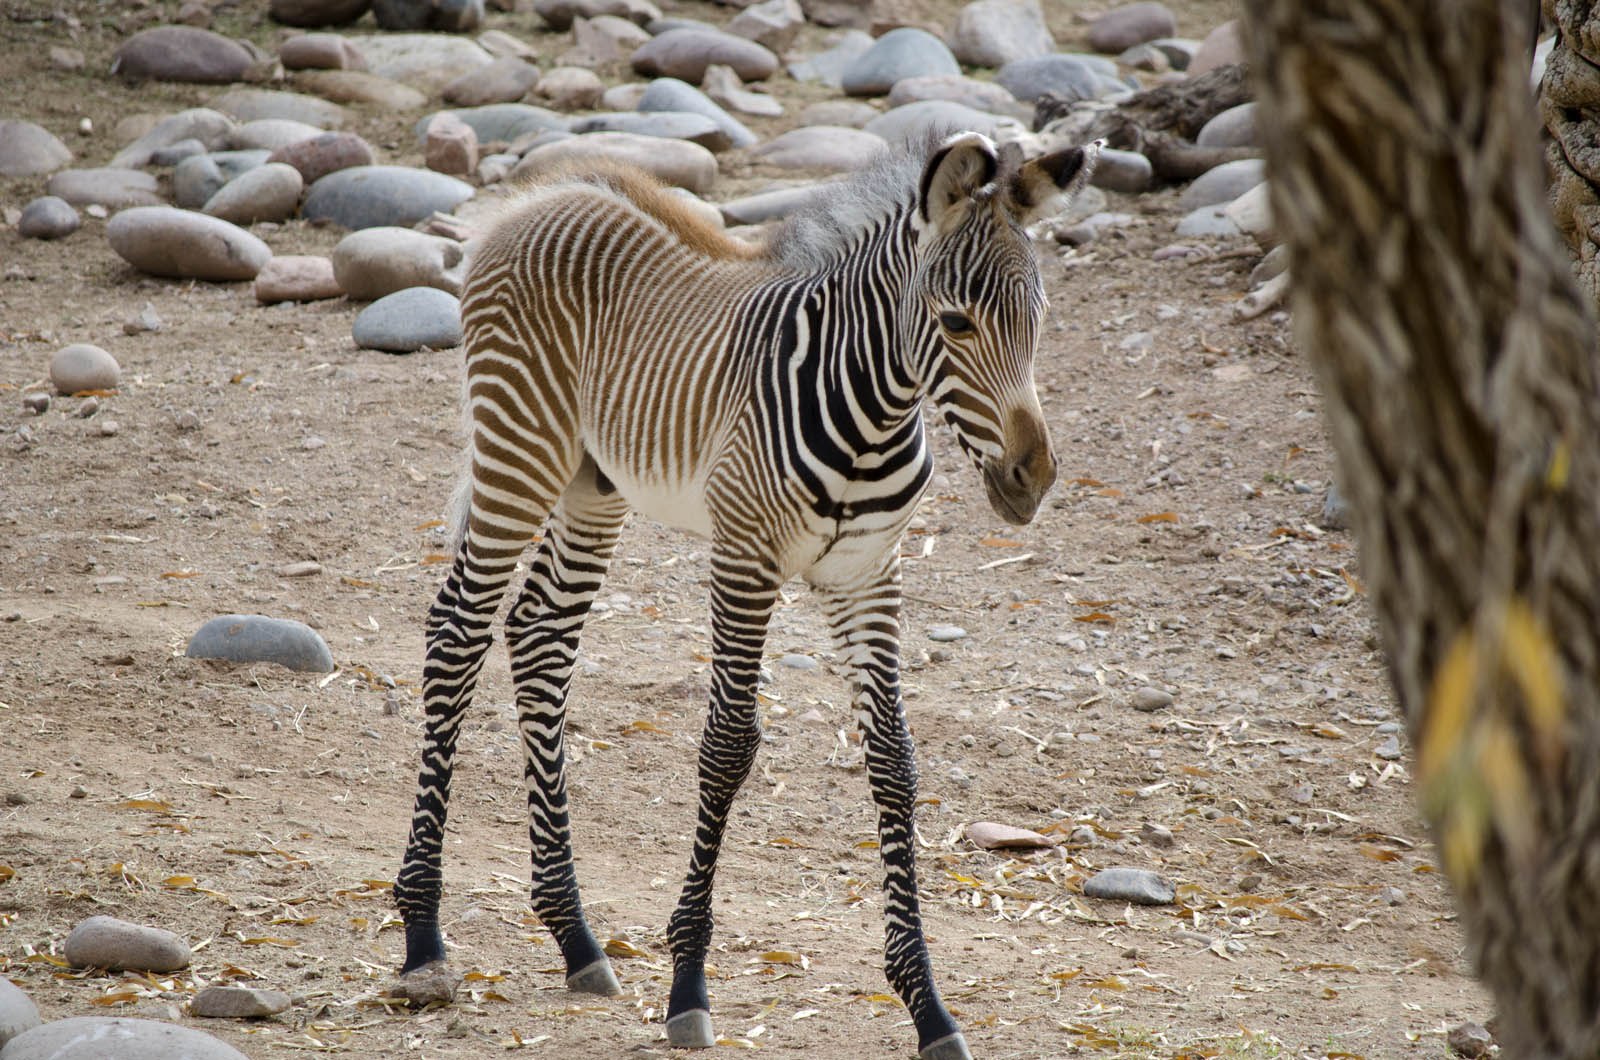 New Arrivals at the Phoenix Zoo - Green Living Magazine